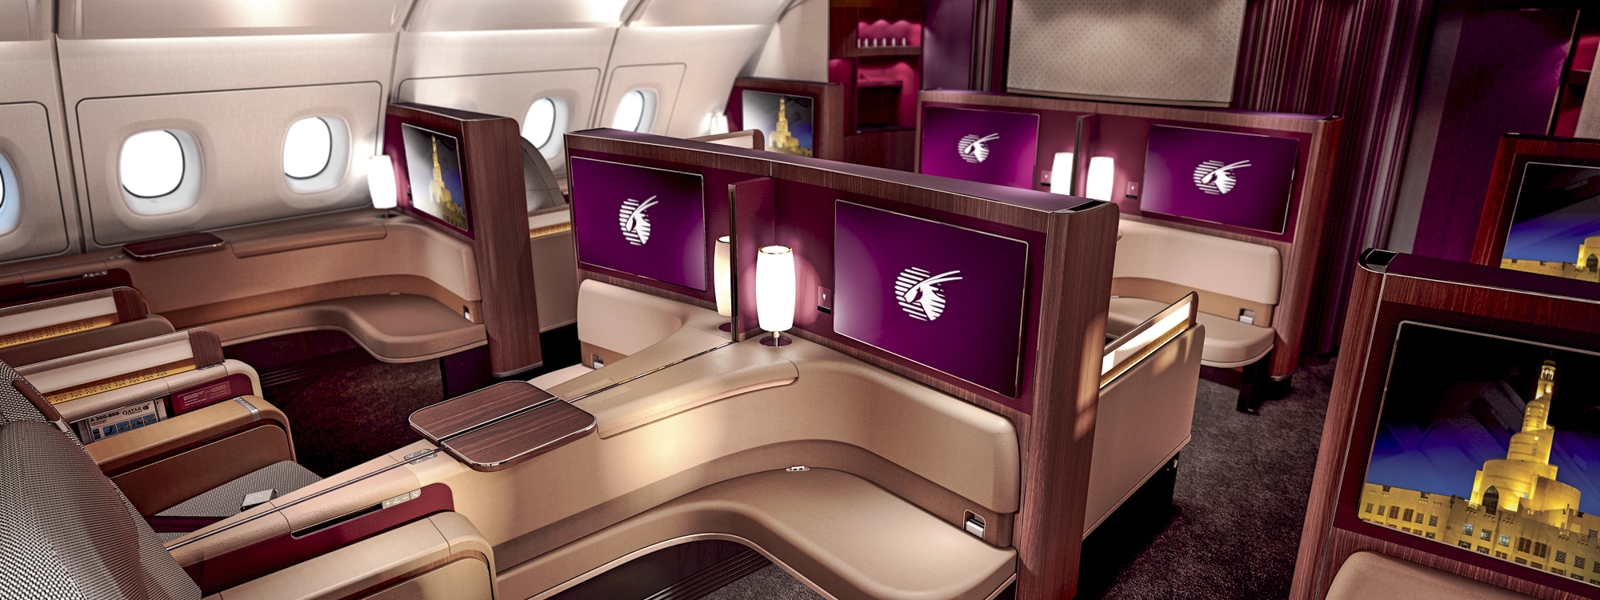 From Nobu to Armani | The new Qatar A380